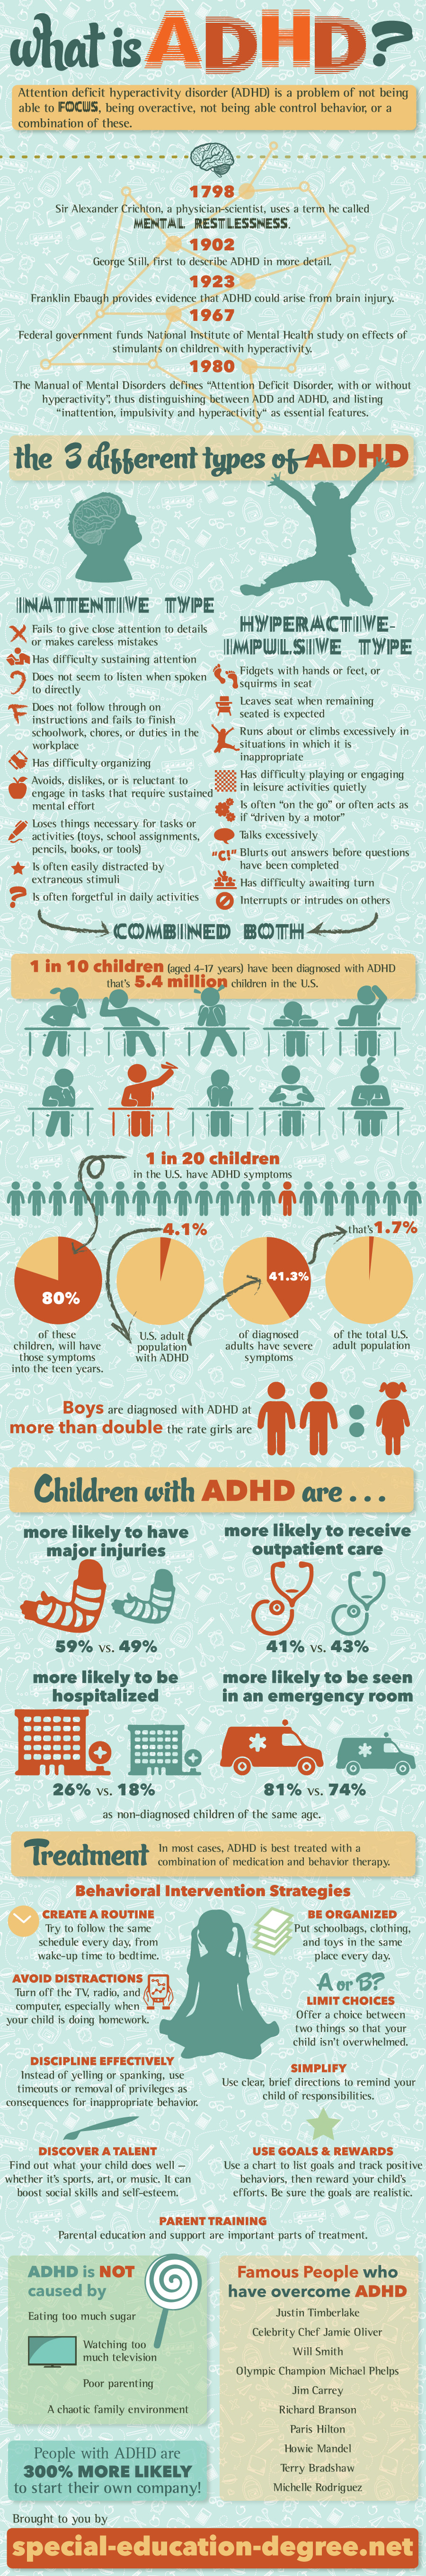 ADHD: A Primer | Special Education Degrees